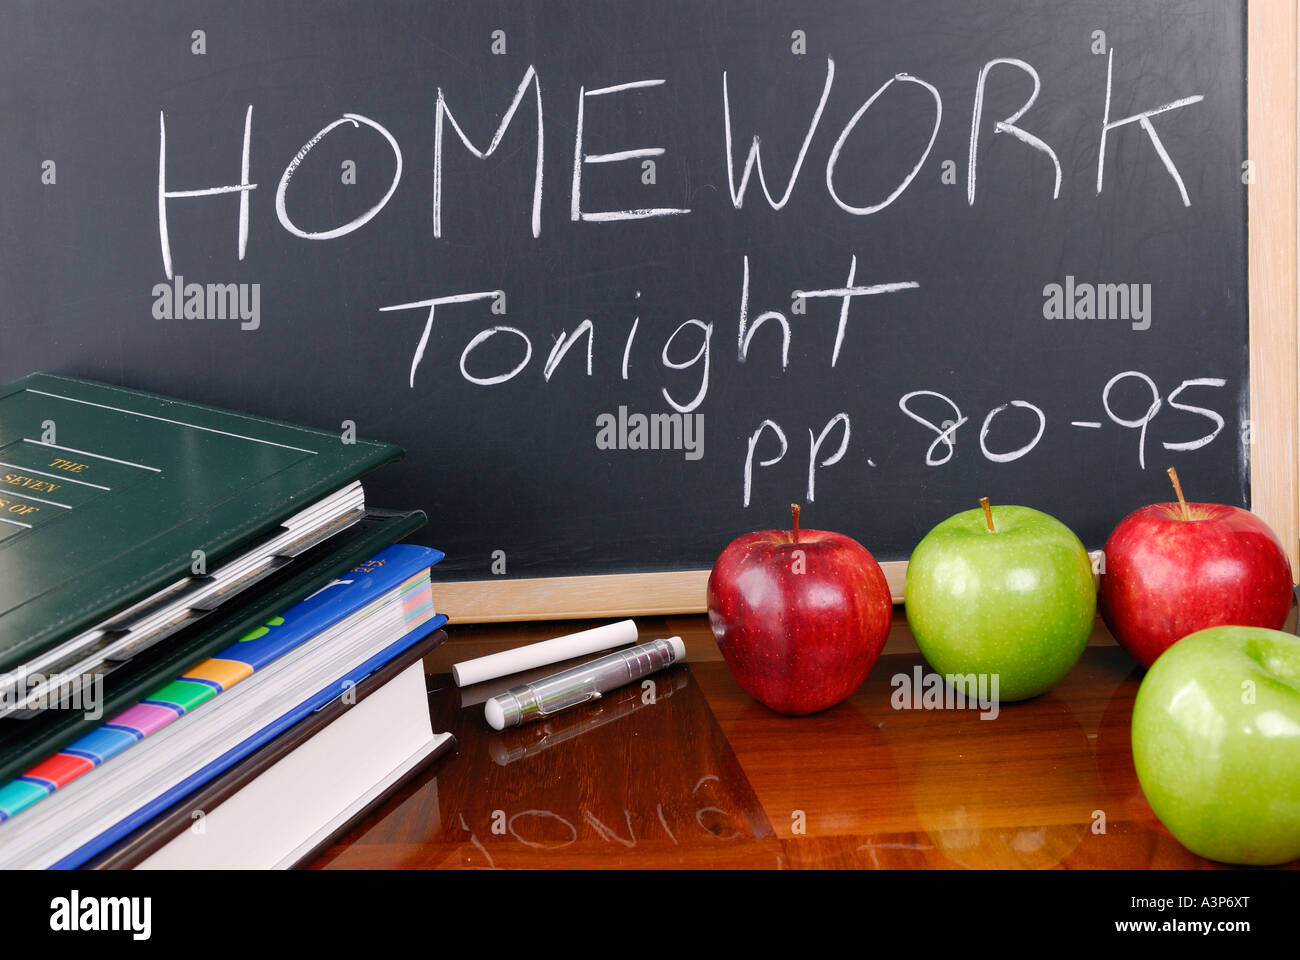 Notice on blackboard ofschool homework assignment with books and apples Stock Photo